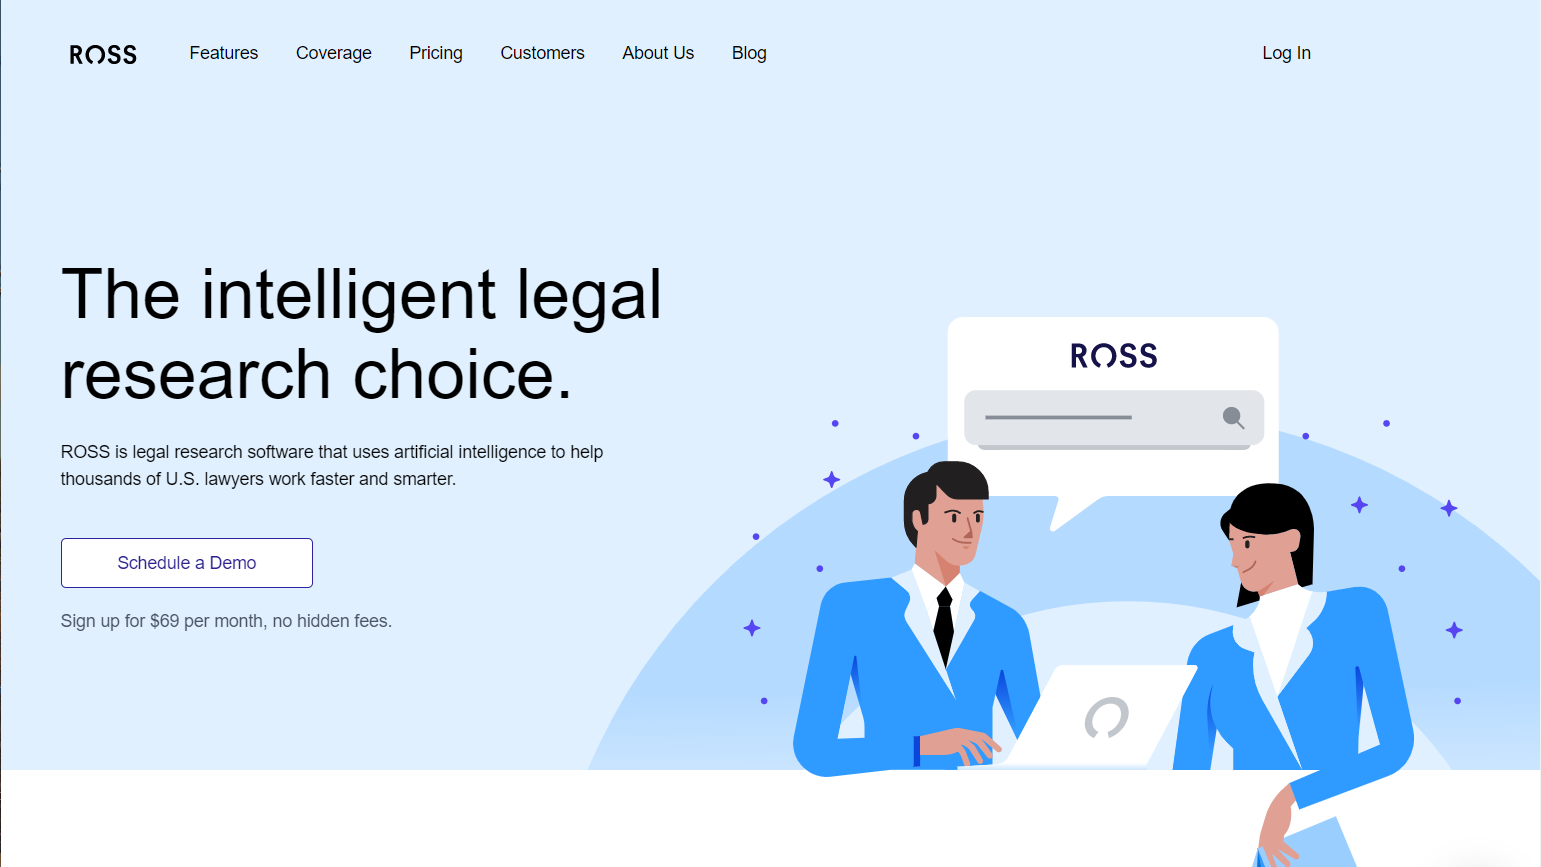 Legal Research Company ROSS to Shut Down Under Pressure of Thomson Reuters&#8217; Lawsuit